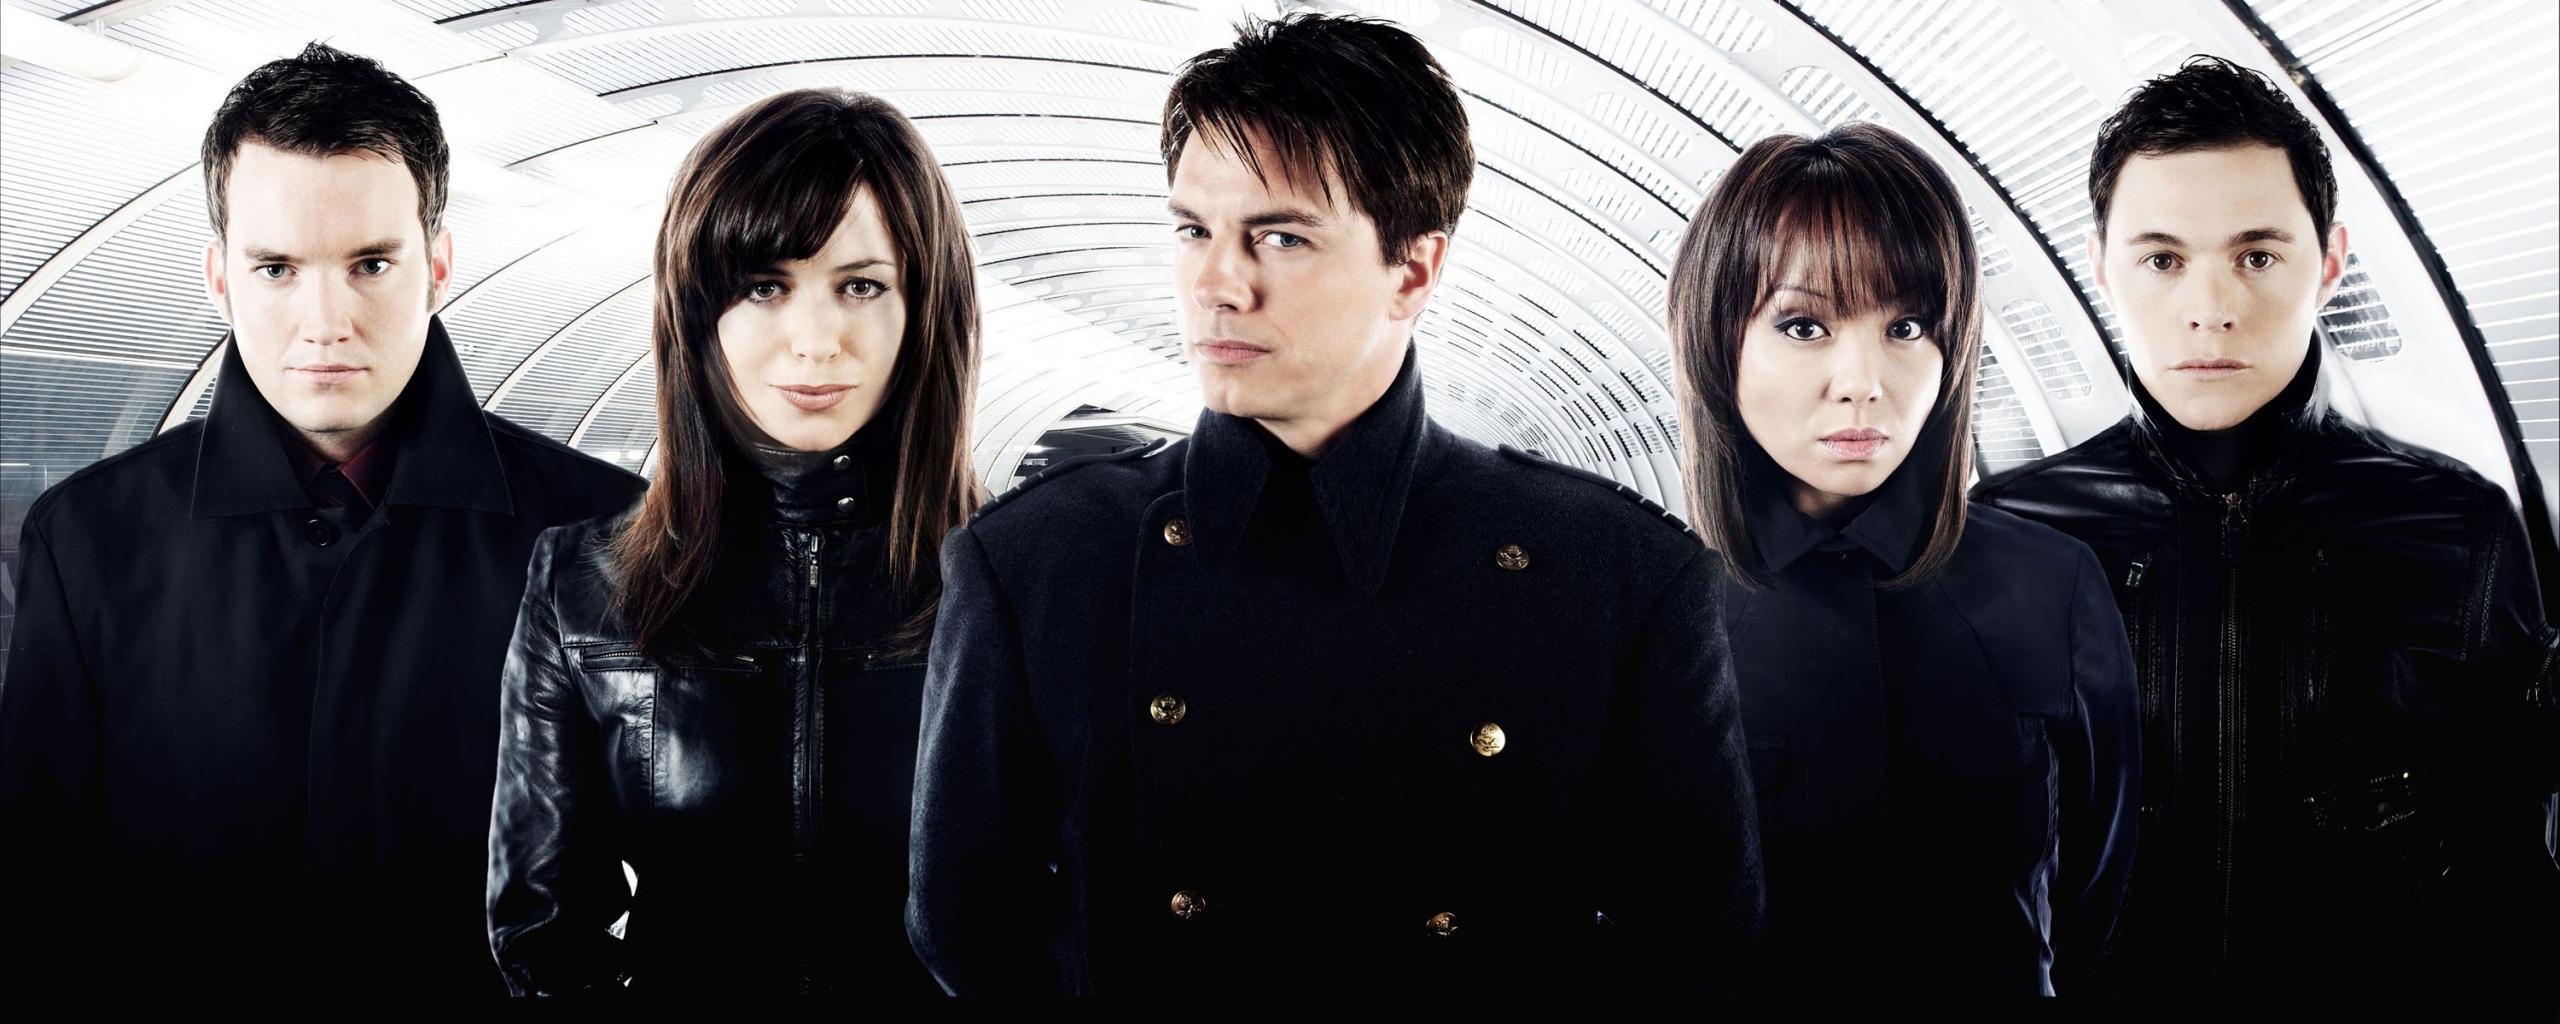 Download dual screen 2560x1024 Torchwood computer background ID:294376 for free